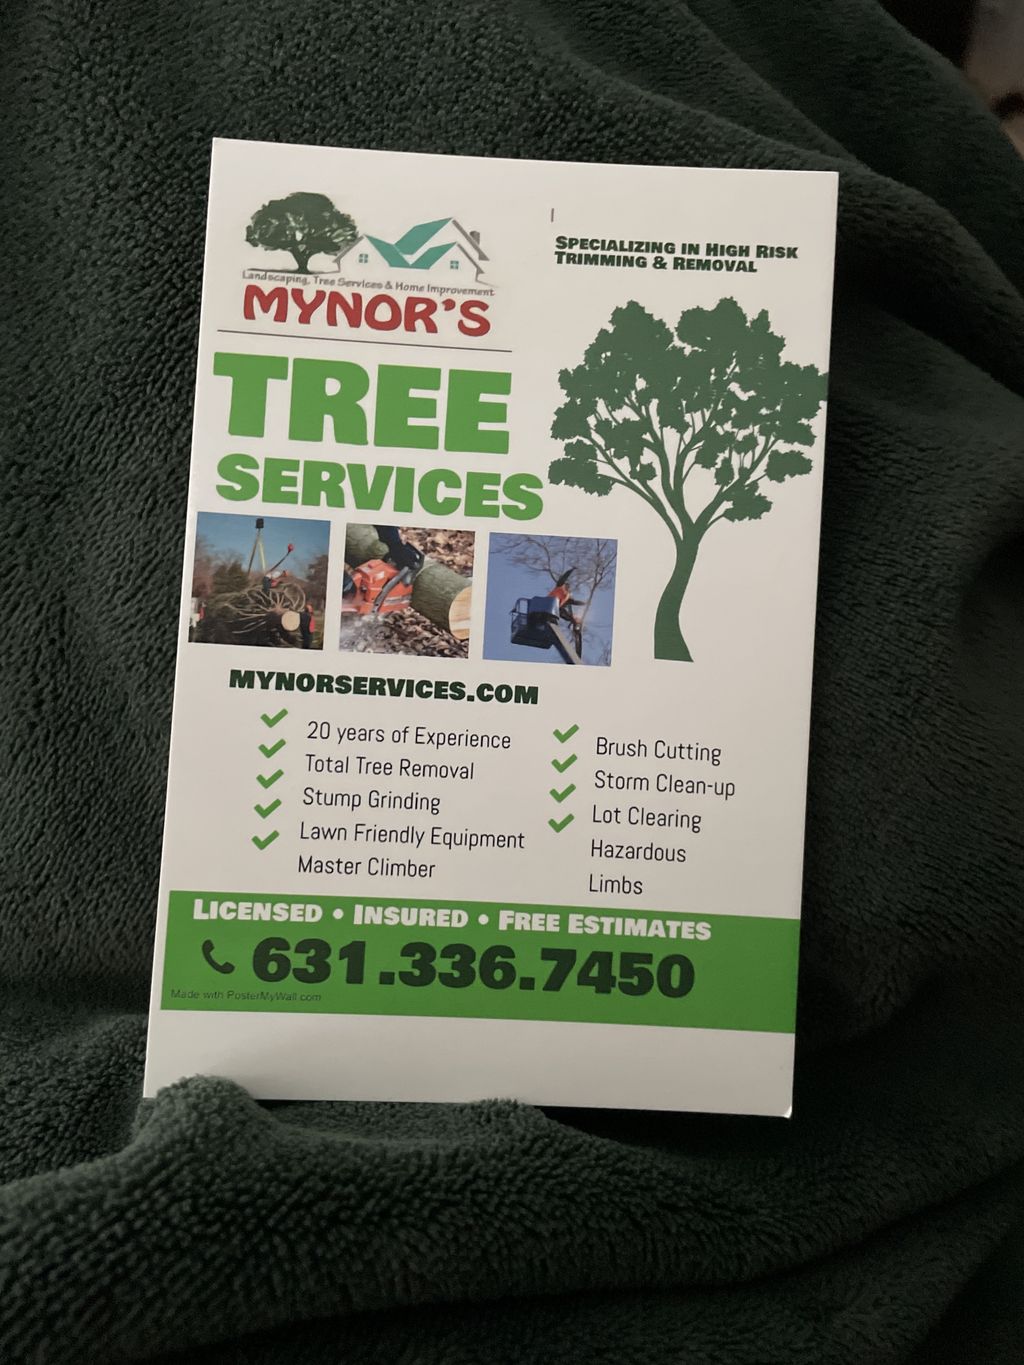 Mynors Tree Services